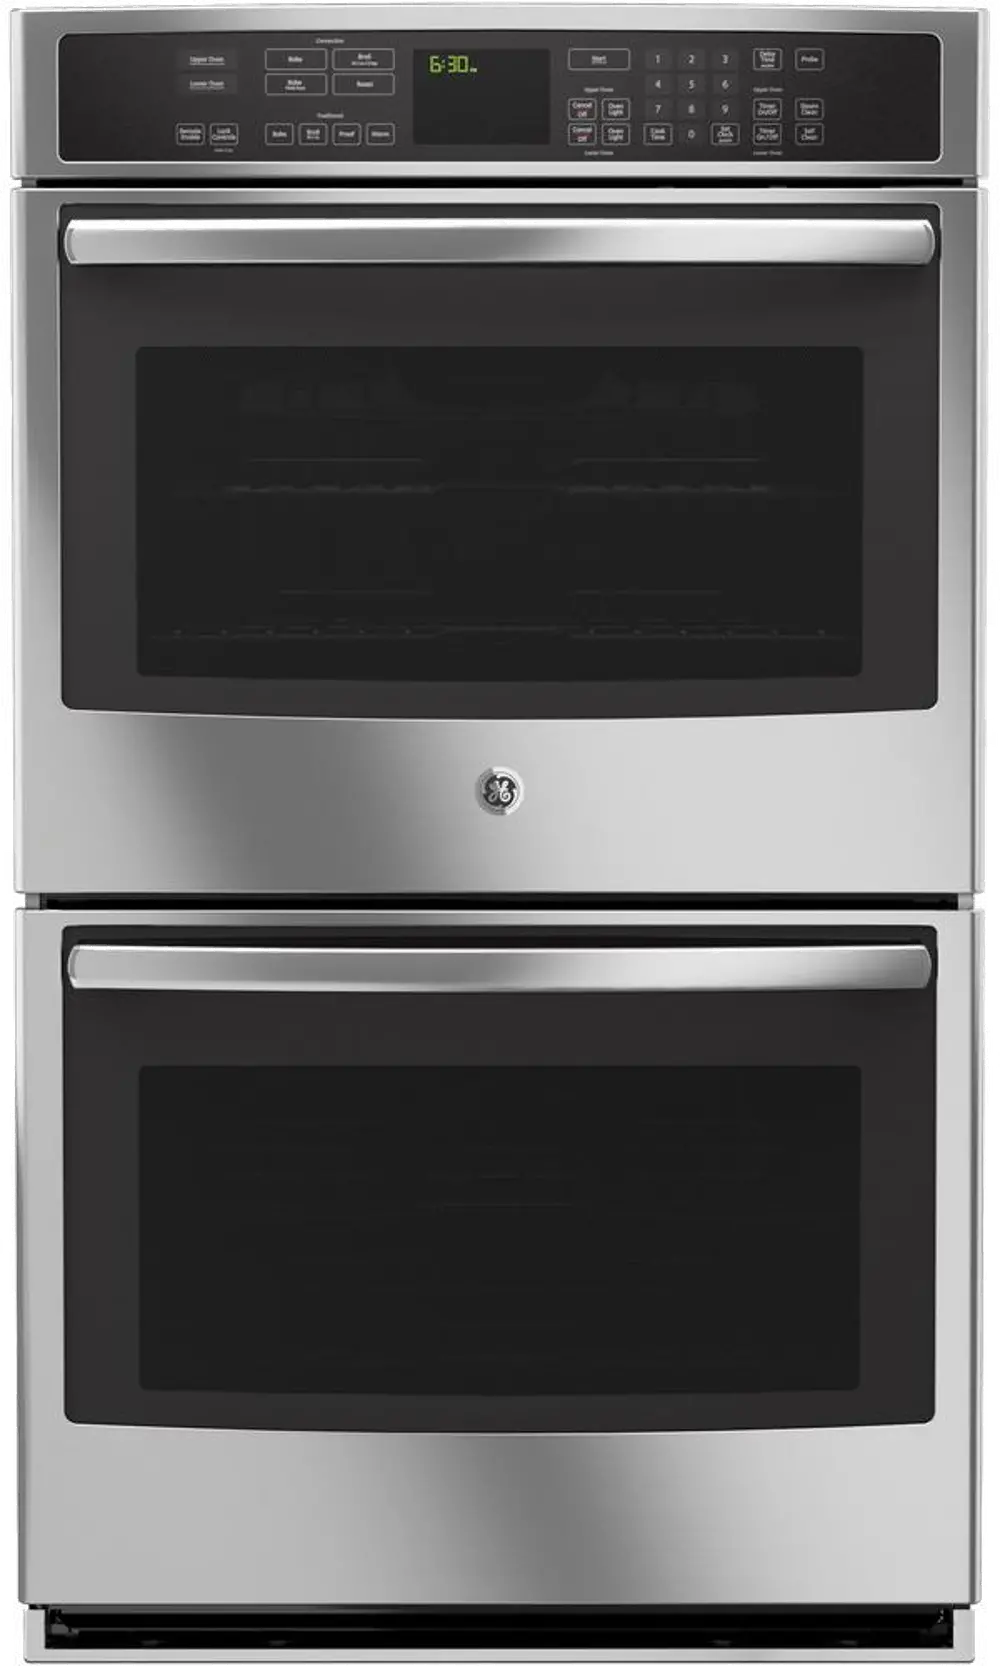 PT9550SFSS GE Profile Smart Double Wall Oven - 10.0 cu. ft.  Stainless Steel-1